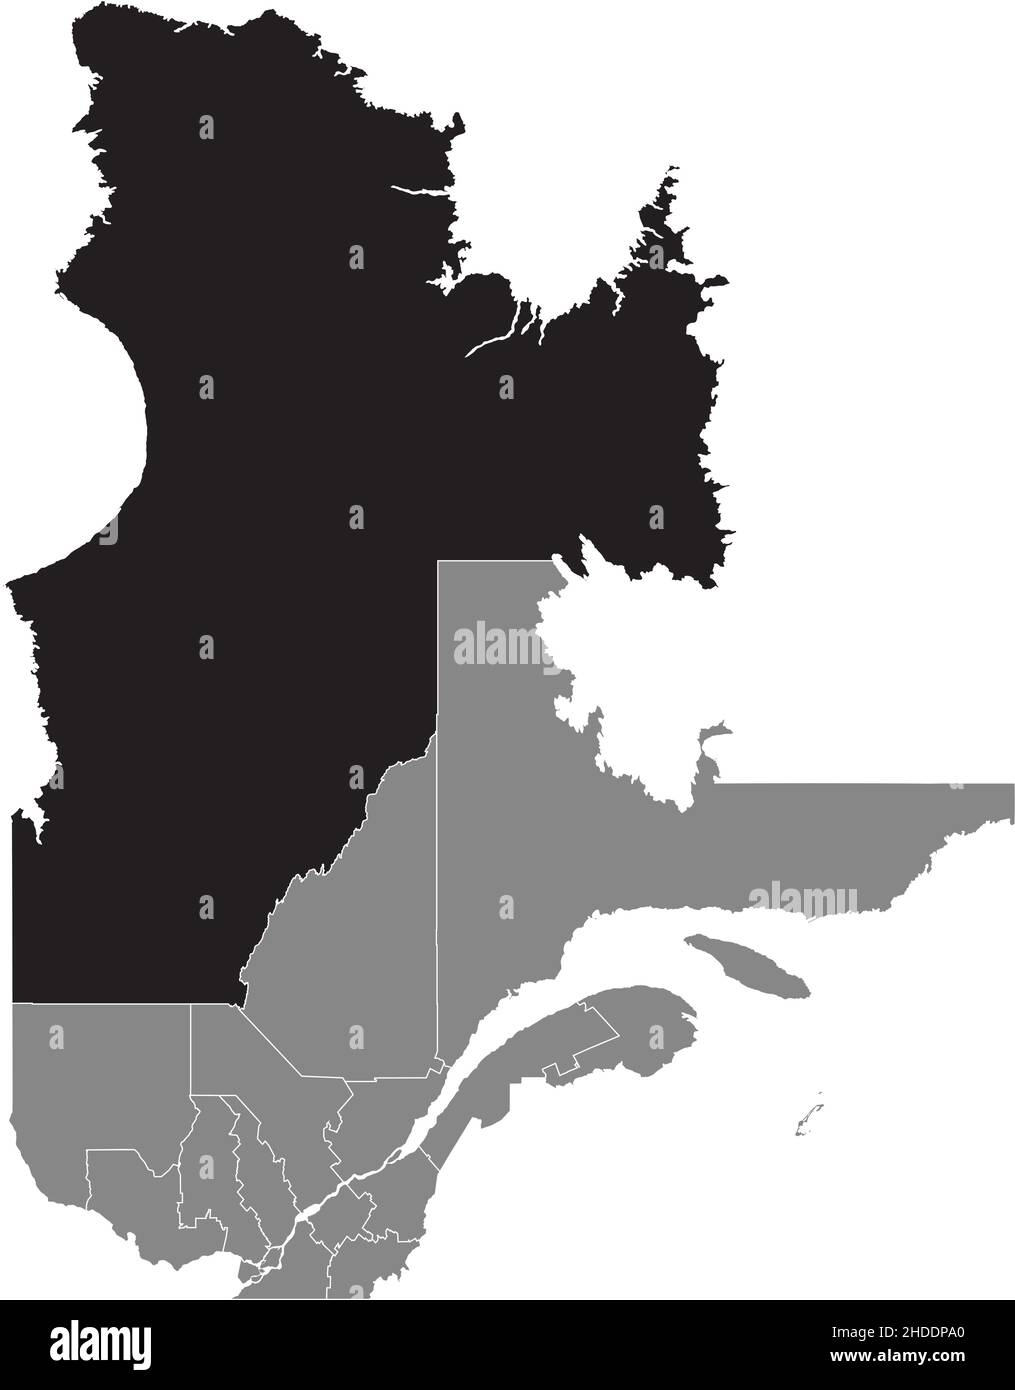 Black Flat Blank Highlighted Location Map Of The Nord-Du-Quebec Region  Inside Gray Administrative Map Of The Canadian Province Of Quebec, Canada  Stock Vector Image & Art - Alamy